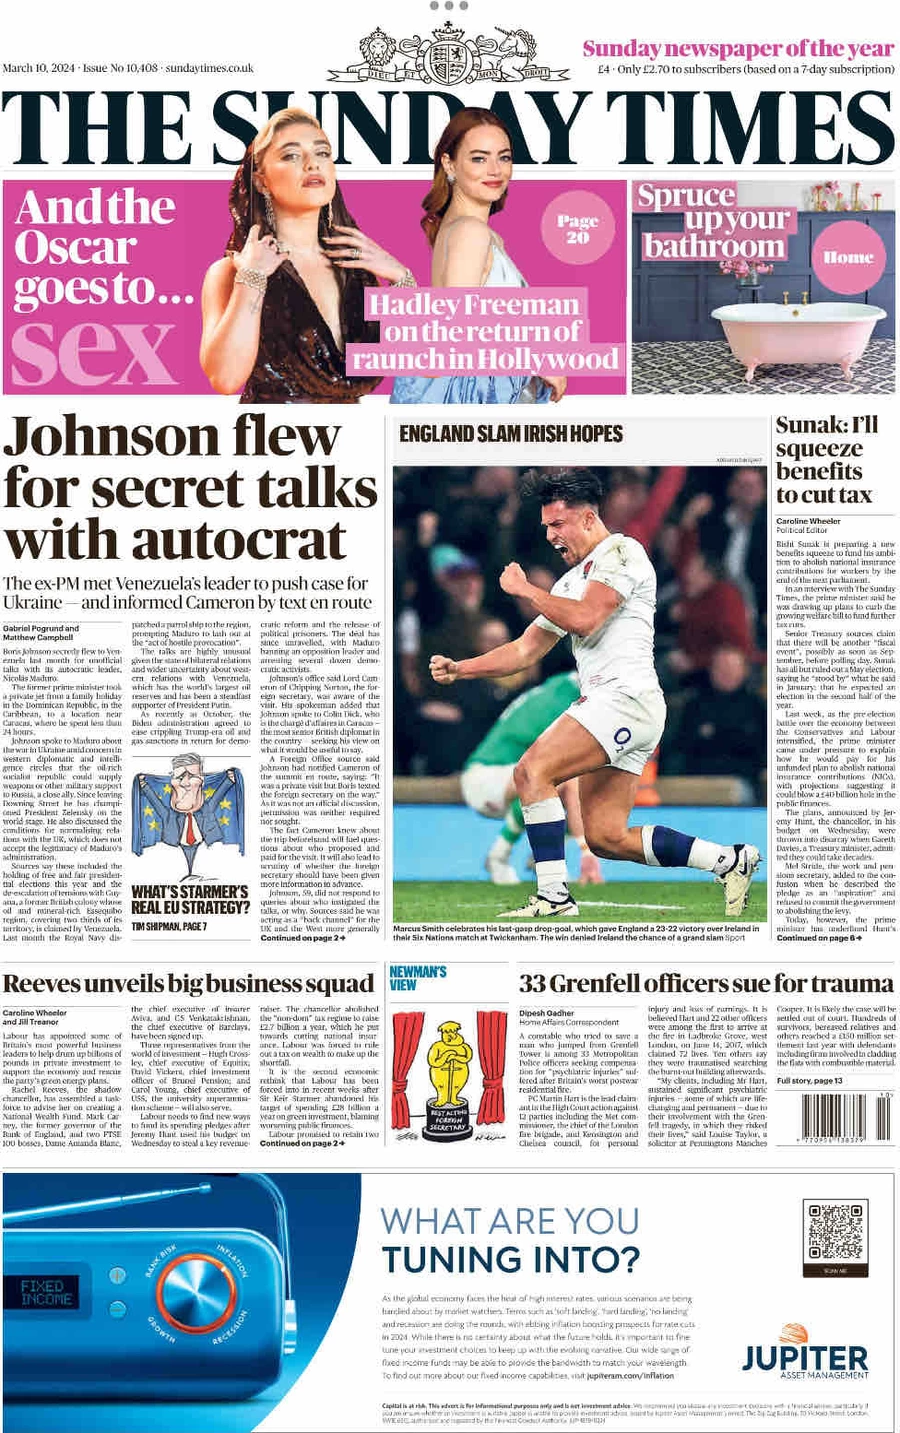 The Sunday Times – Johnson flew for secret talks with autocrat